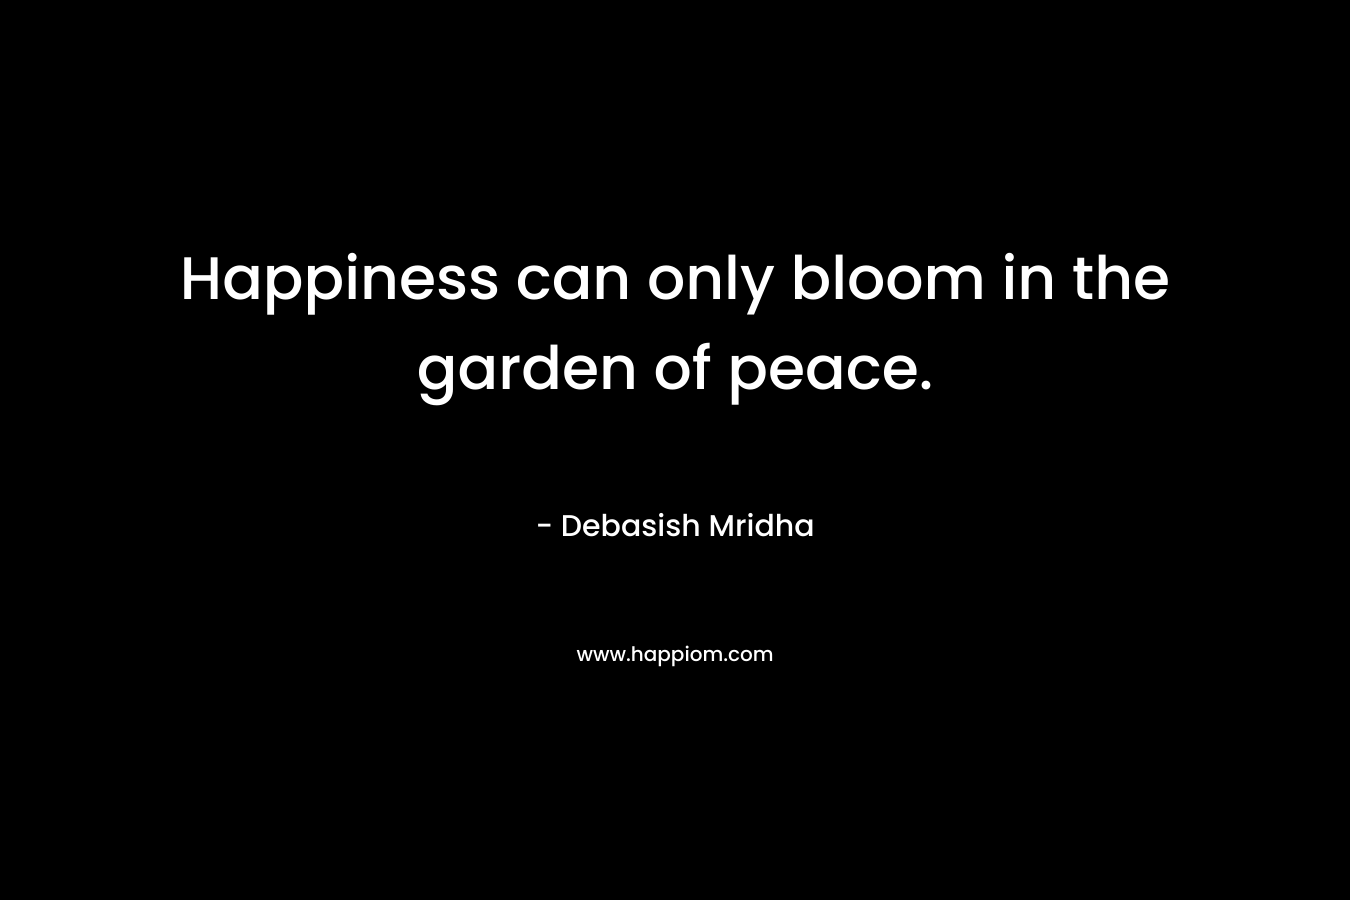 Happiness can only bloom in the garden of peace.